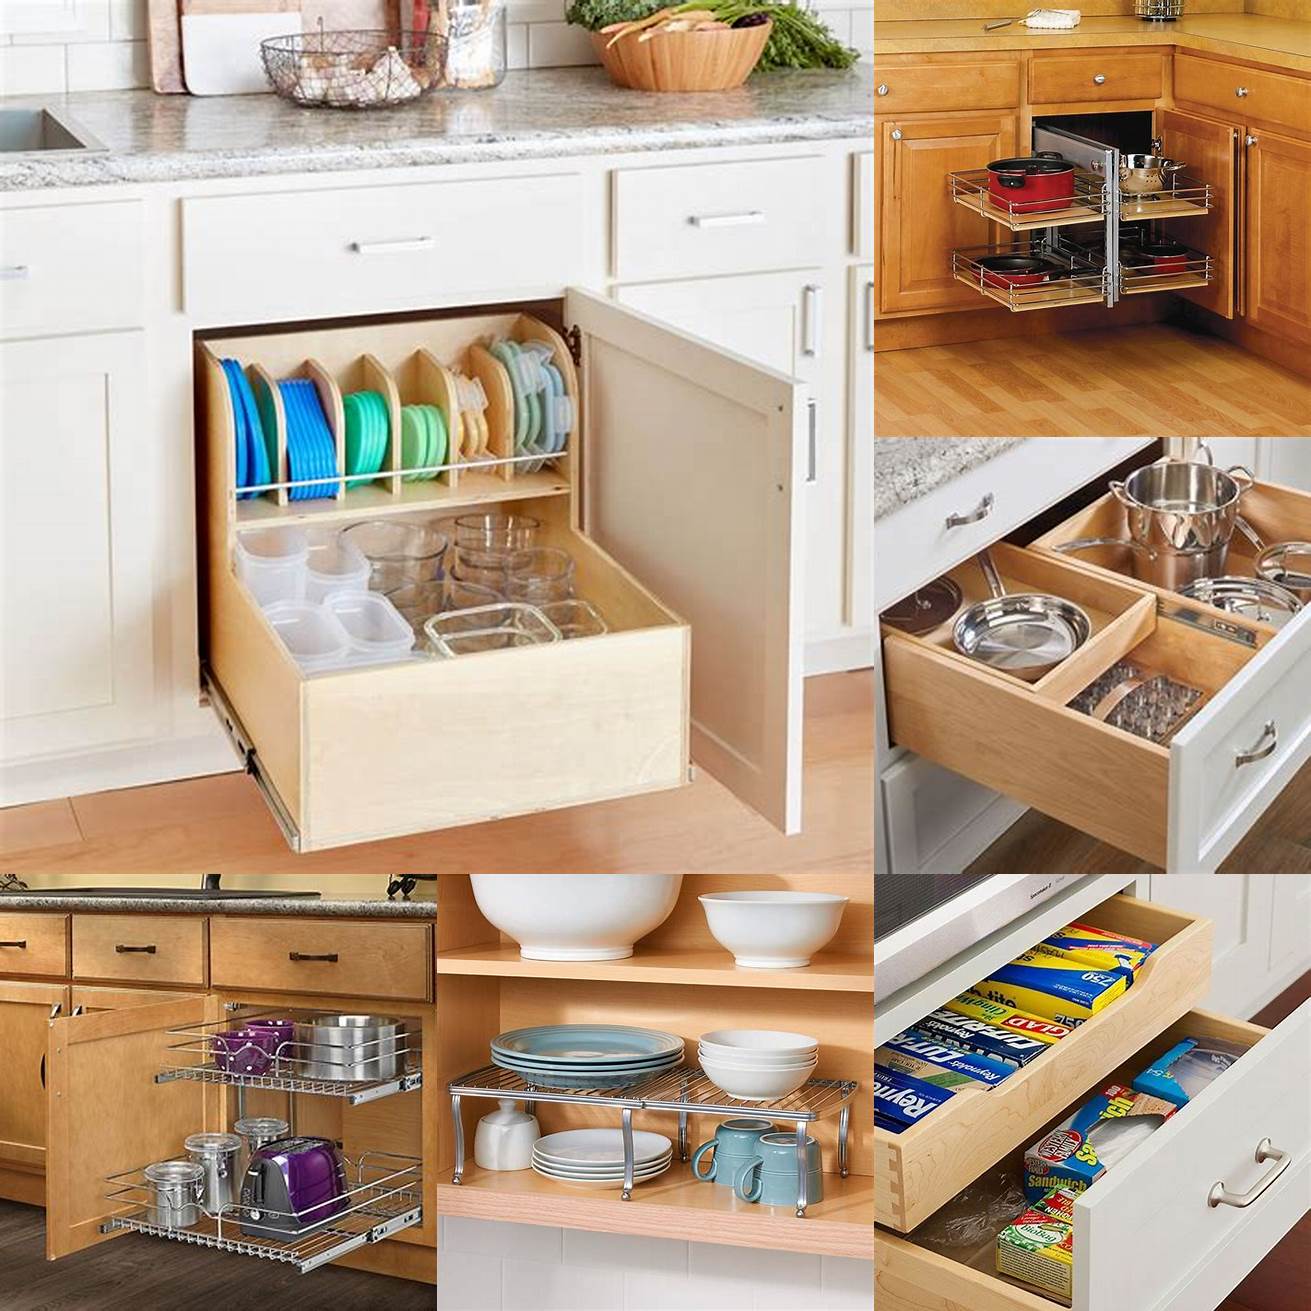 Maximize your space Use every inch of your cabinet space by using organizers such as drawer dividers hanging rods and shelf risers